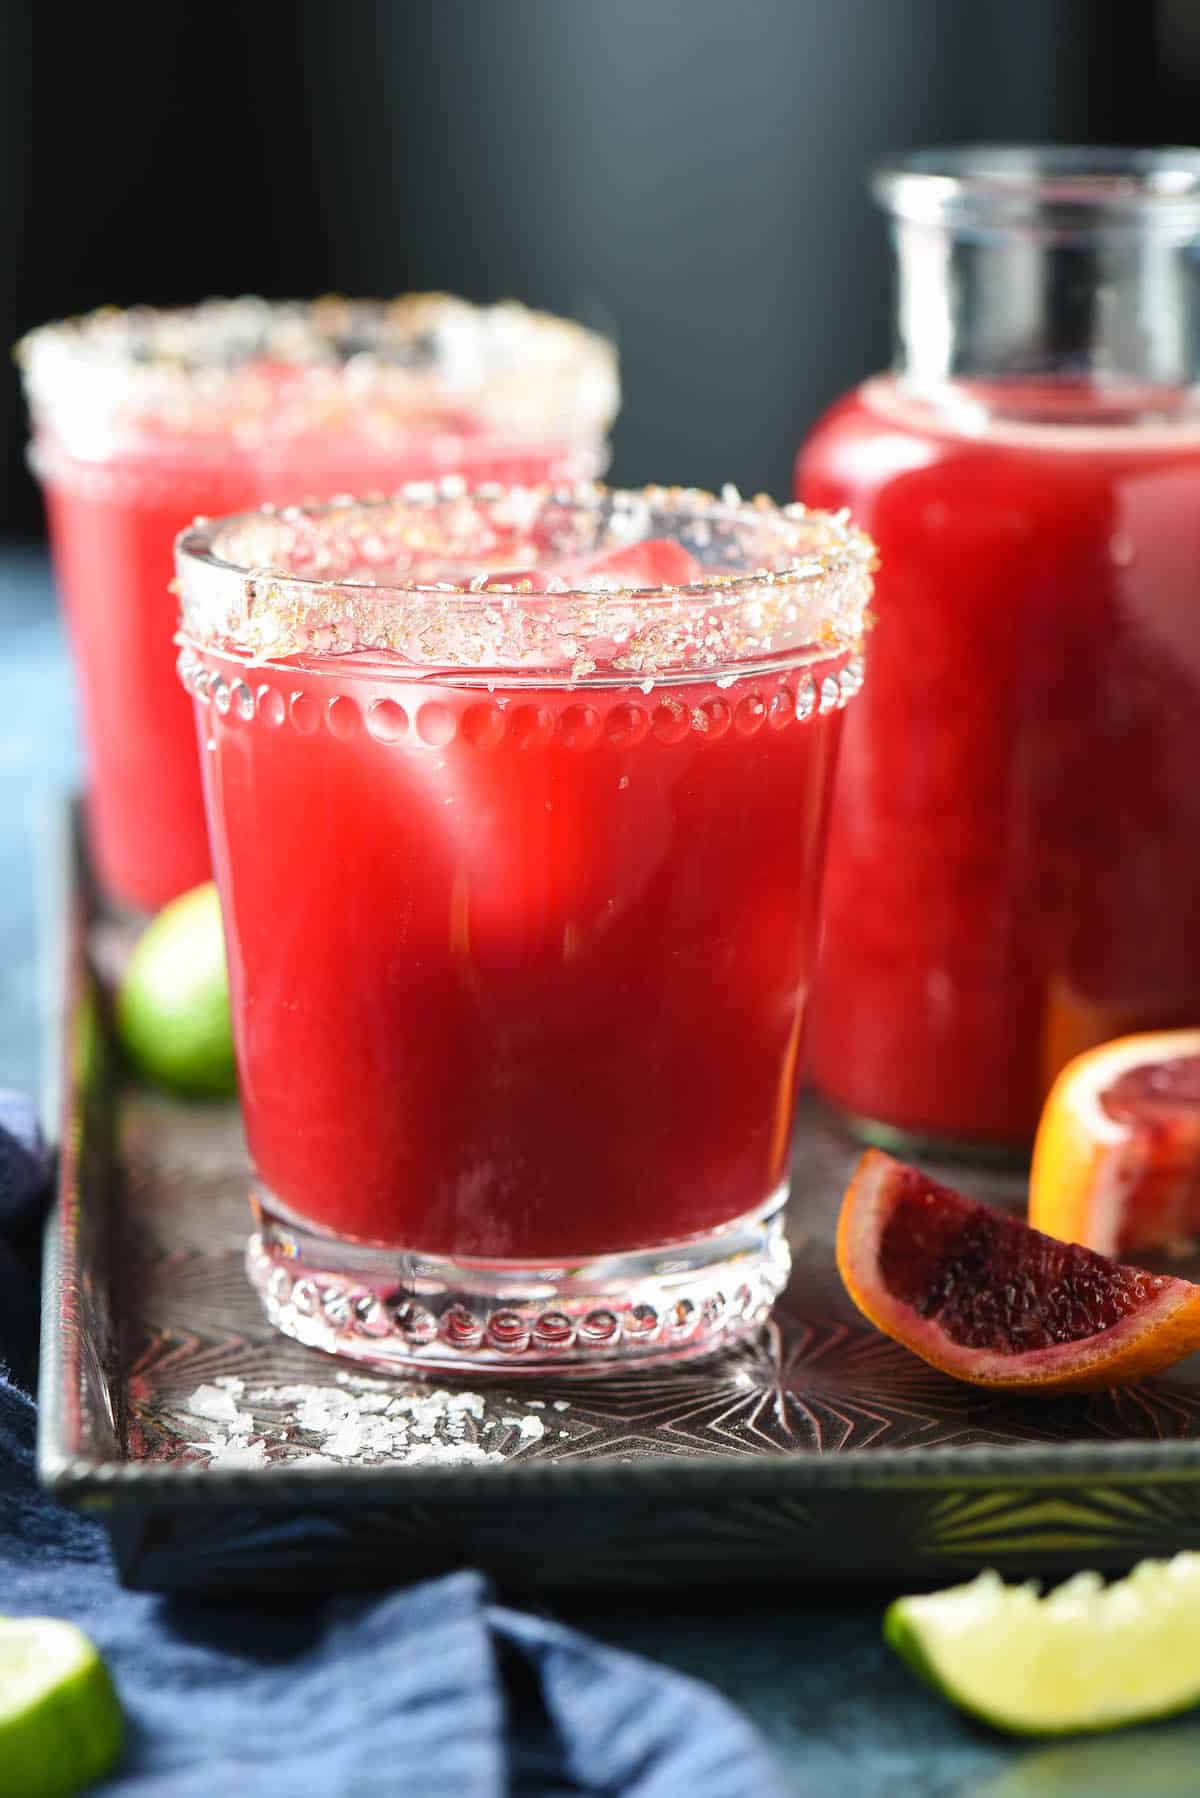 Bright red cocktail in glass garnished with salt and sugar.